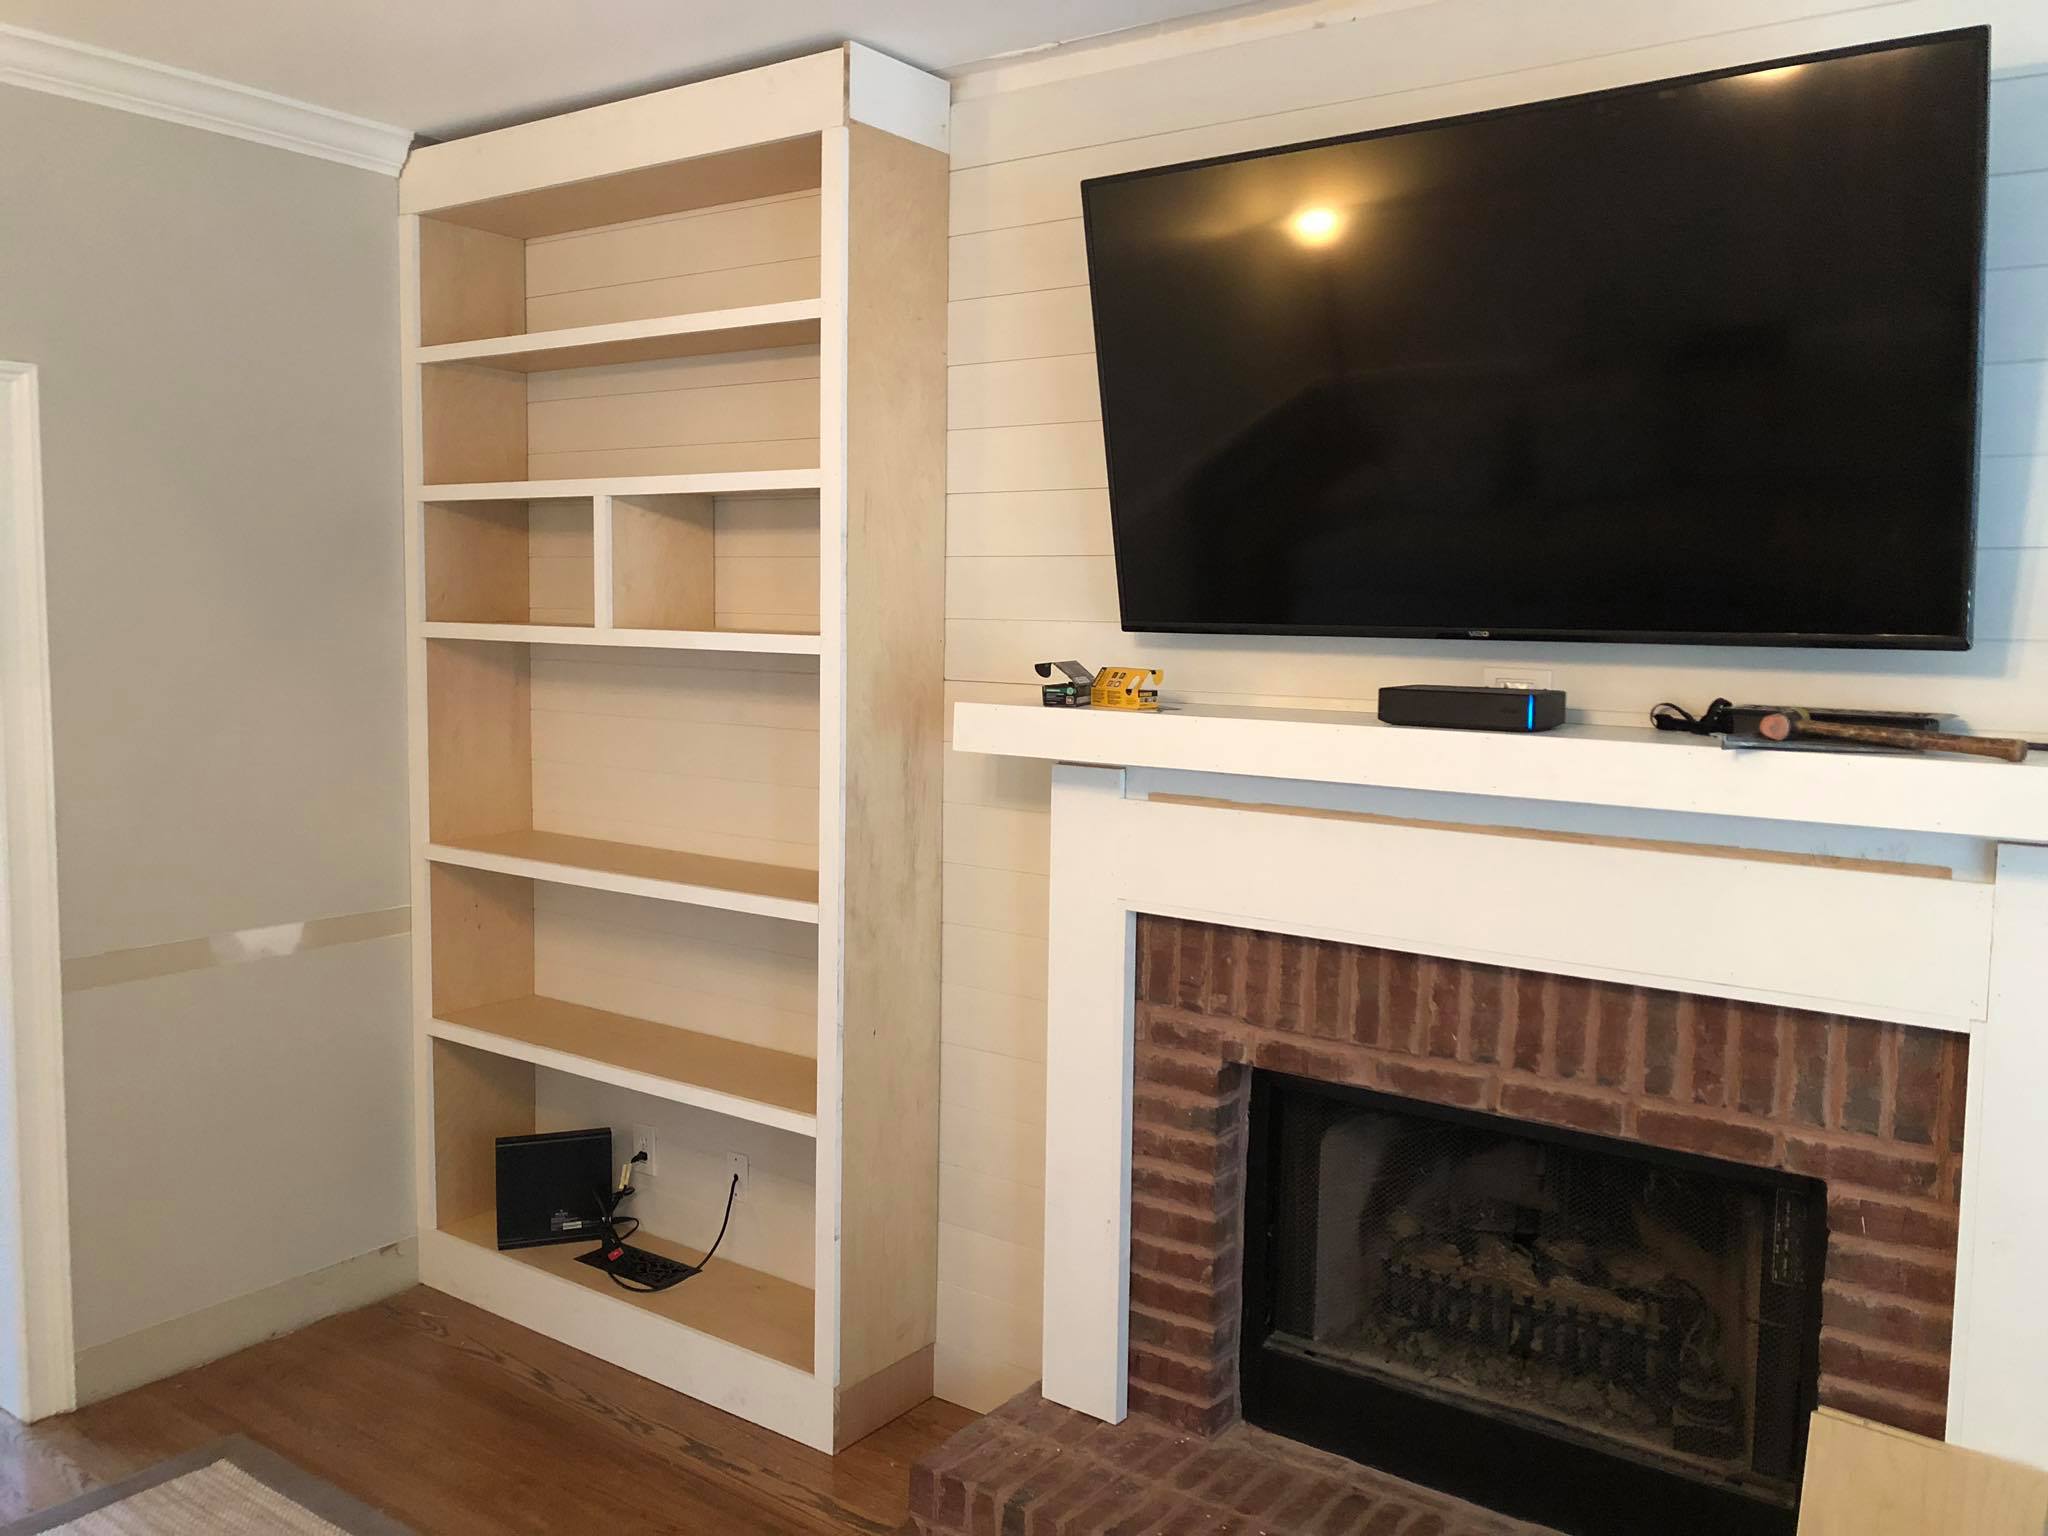 Fireplace Custom Wall High Built in Cabinets Shelves and Trim Painted White Installing 3